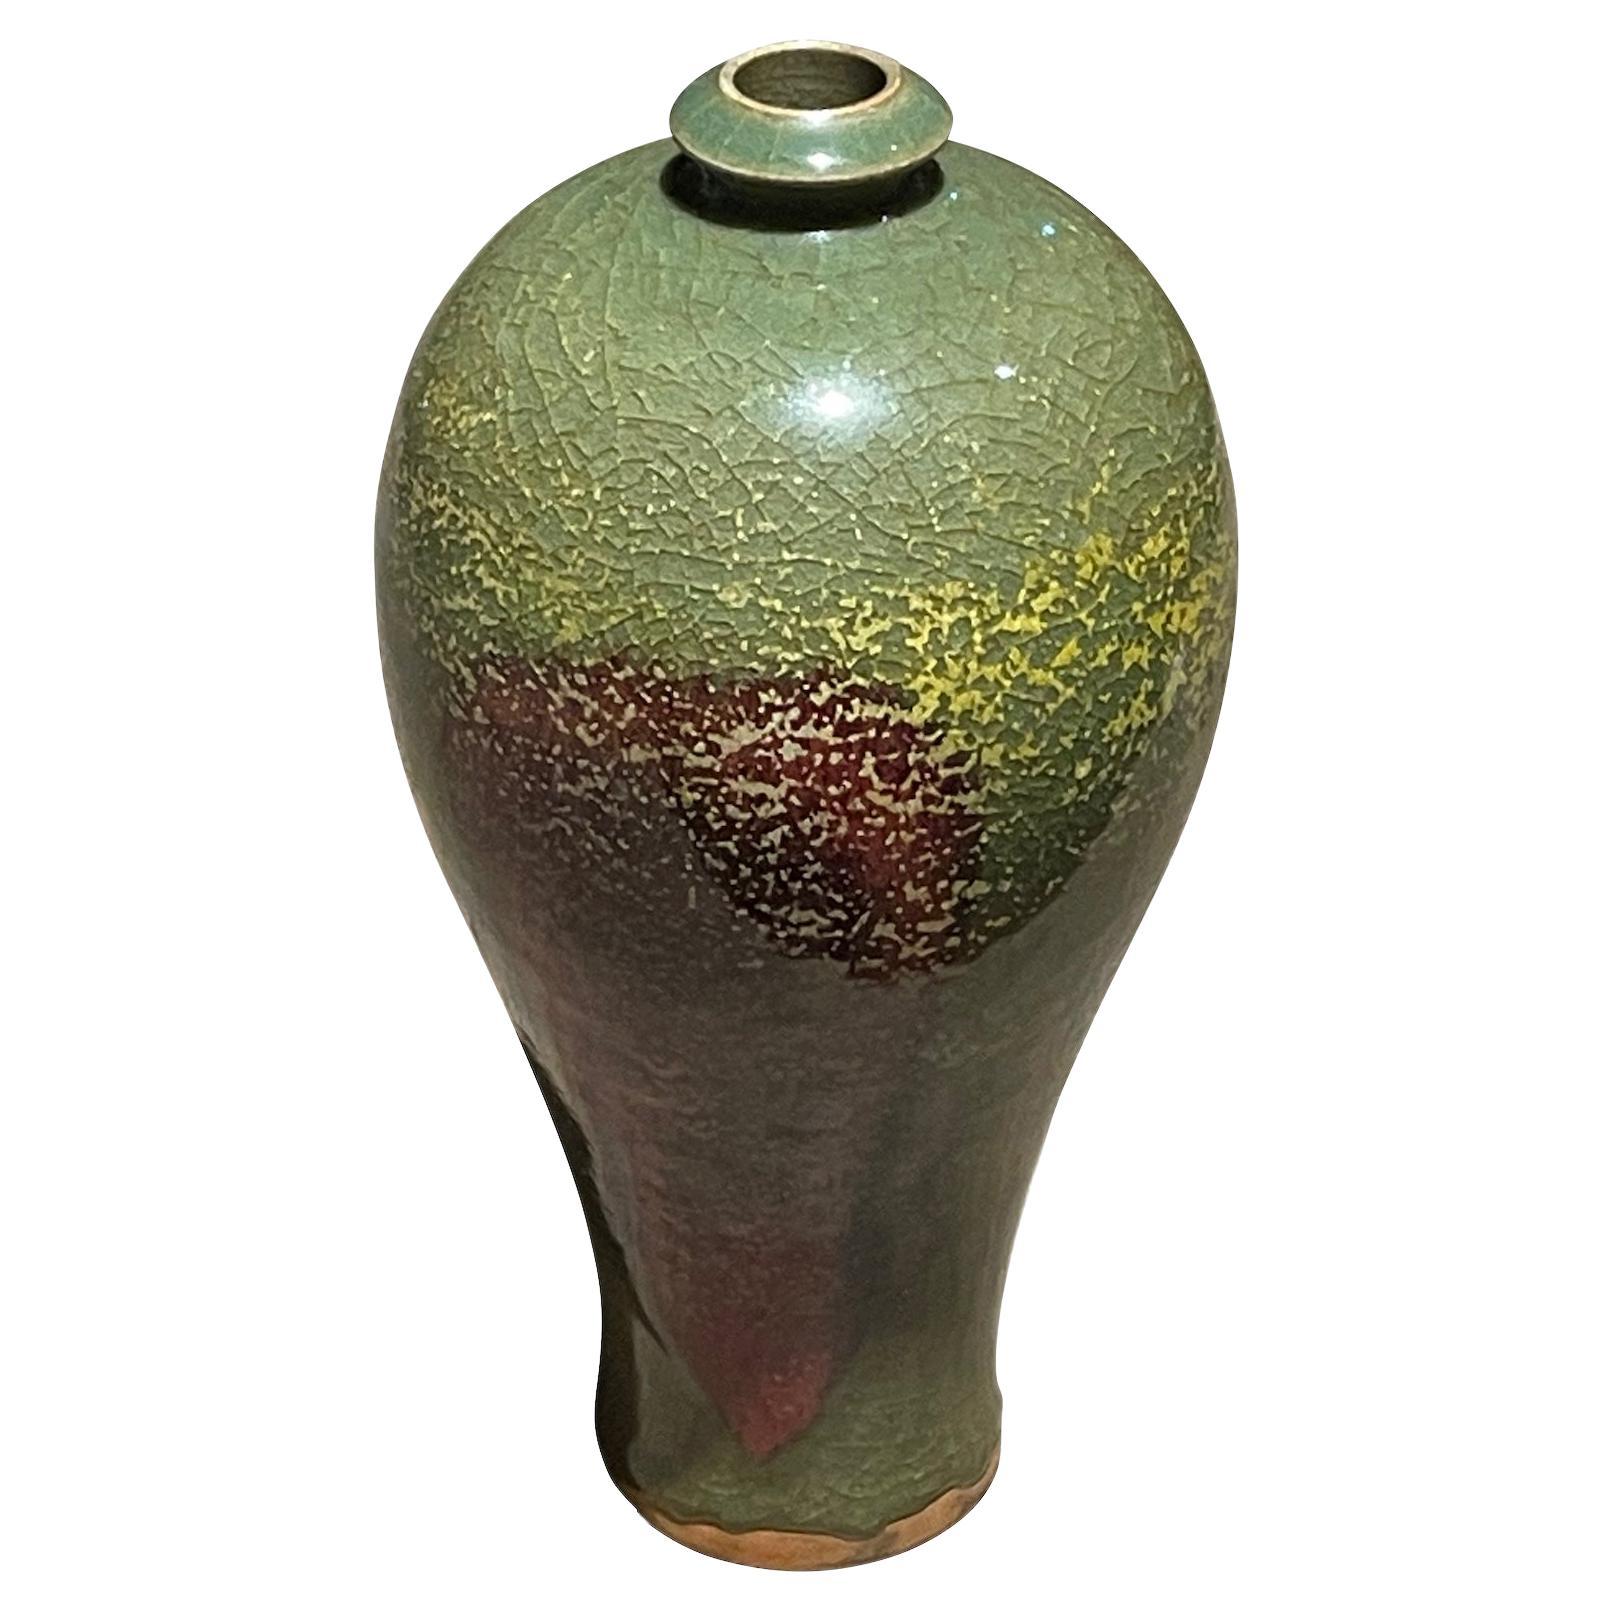 Contemporary Chinese thin small spout vase.
Olive glaze with burgundy accent.
From a collection of same colorways in different shapes and sizes.
Each vase sold individually.